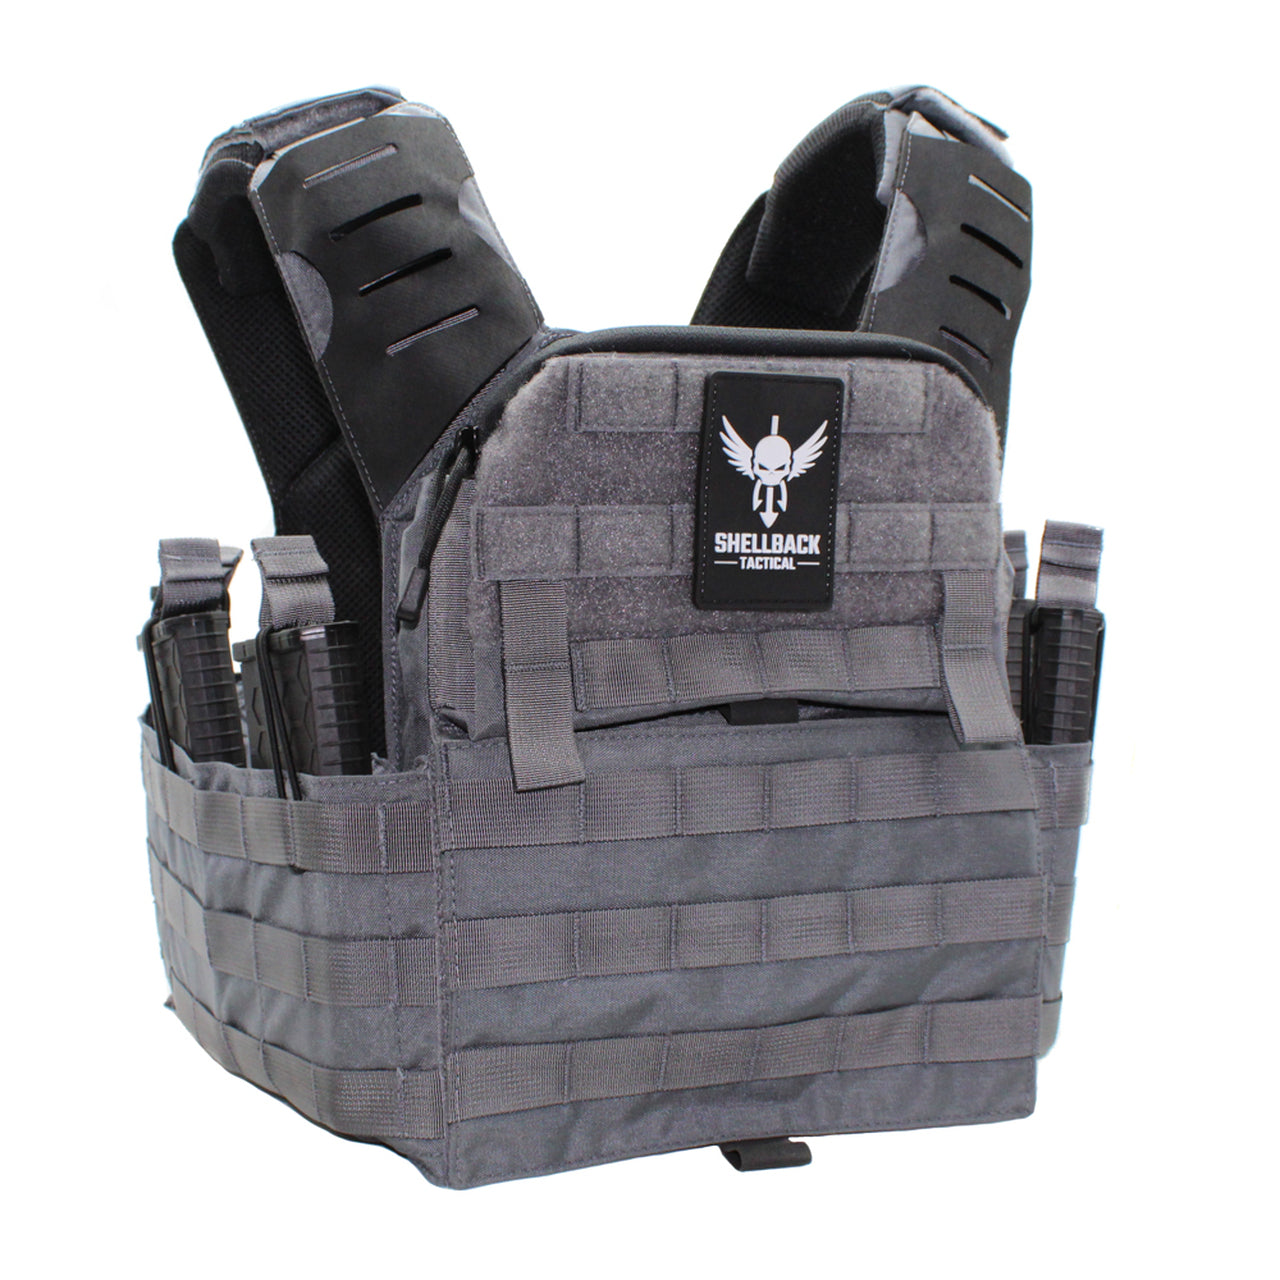 A Shellback Tactical Banshee Elite 2.0 Plate Carrier with multiple compartments.